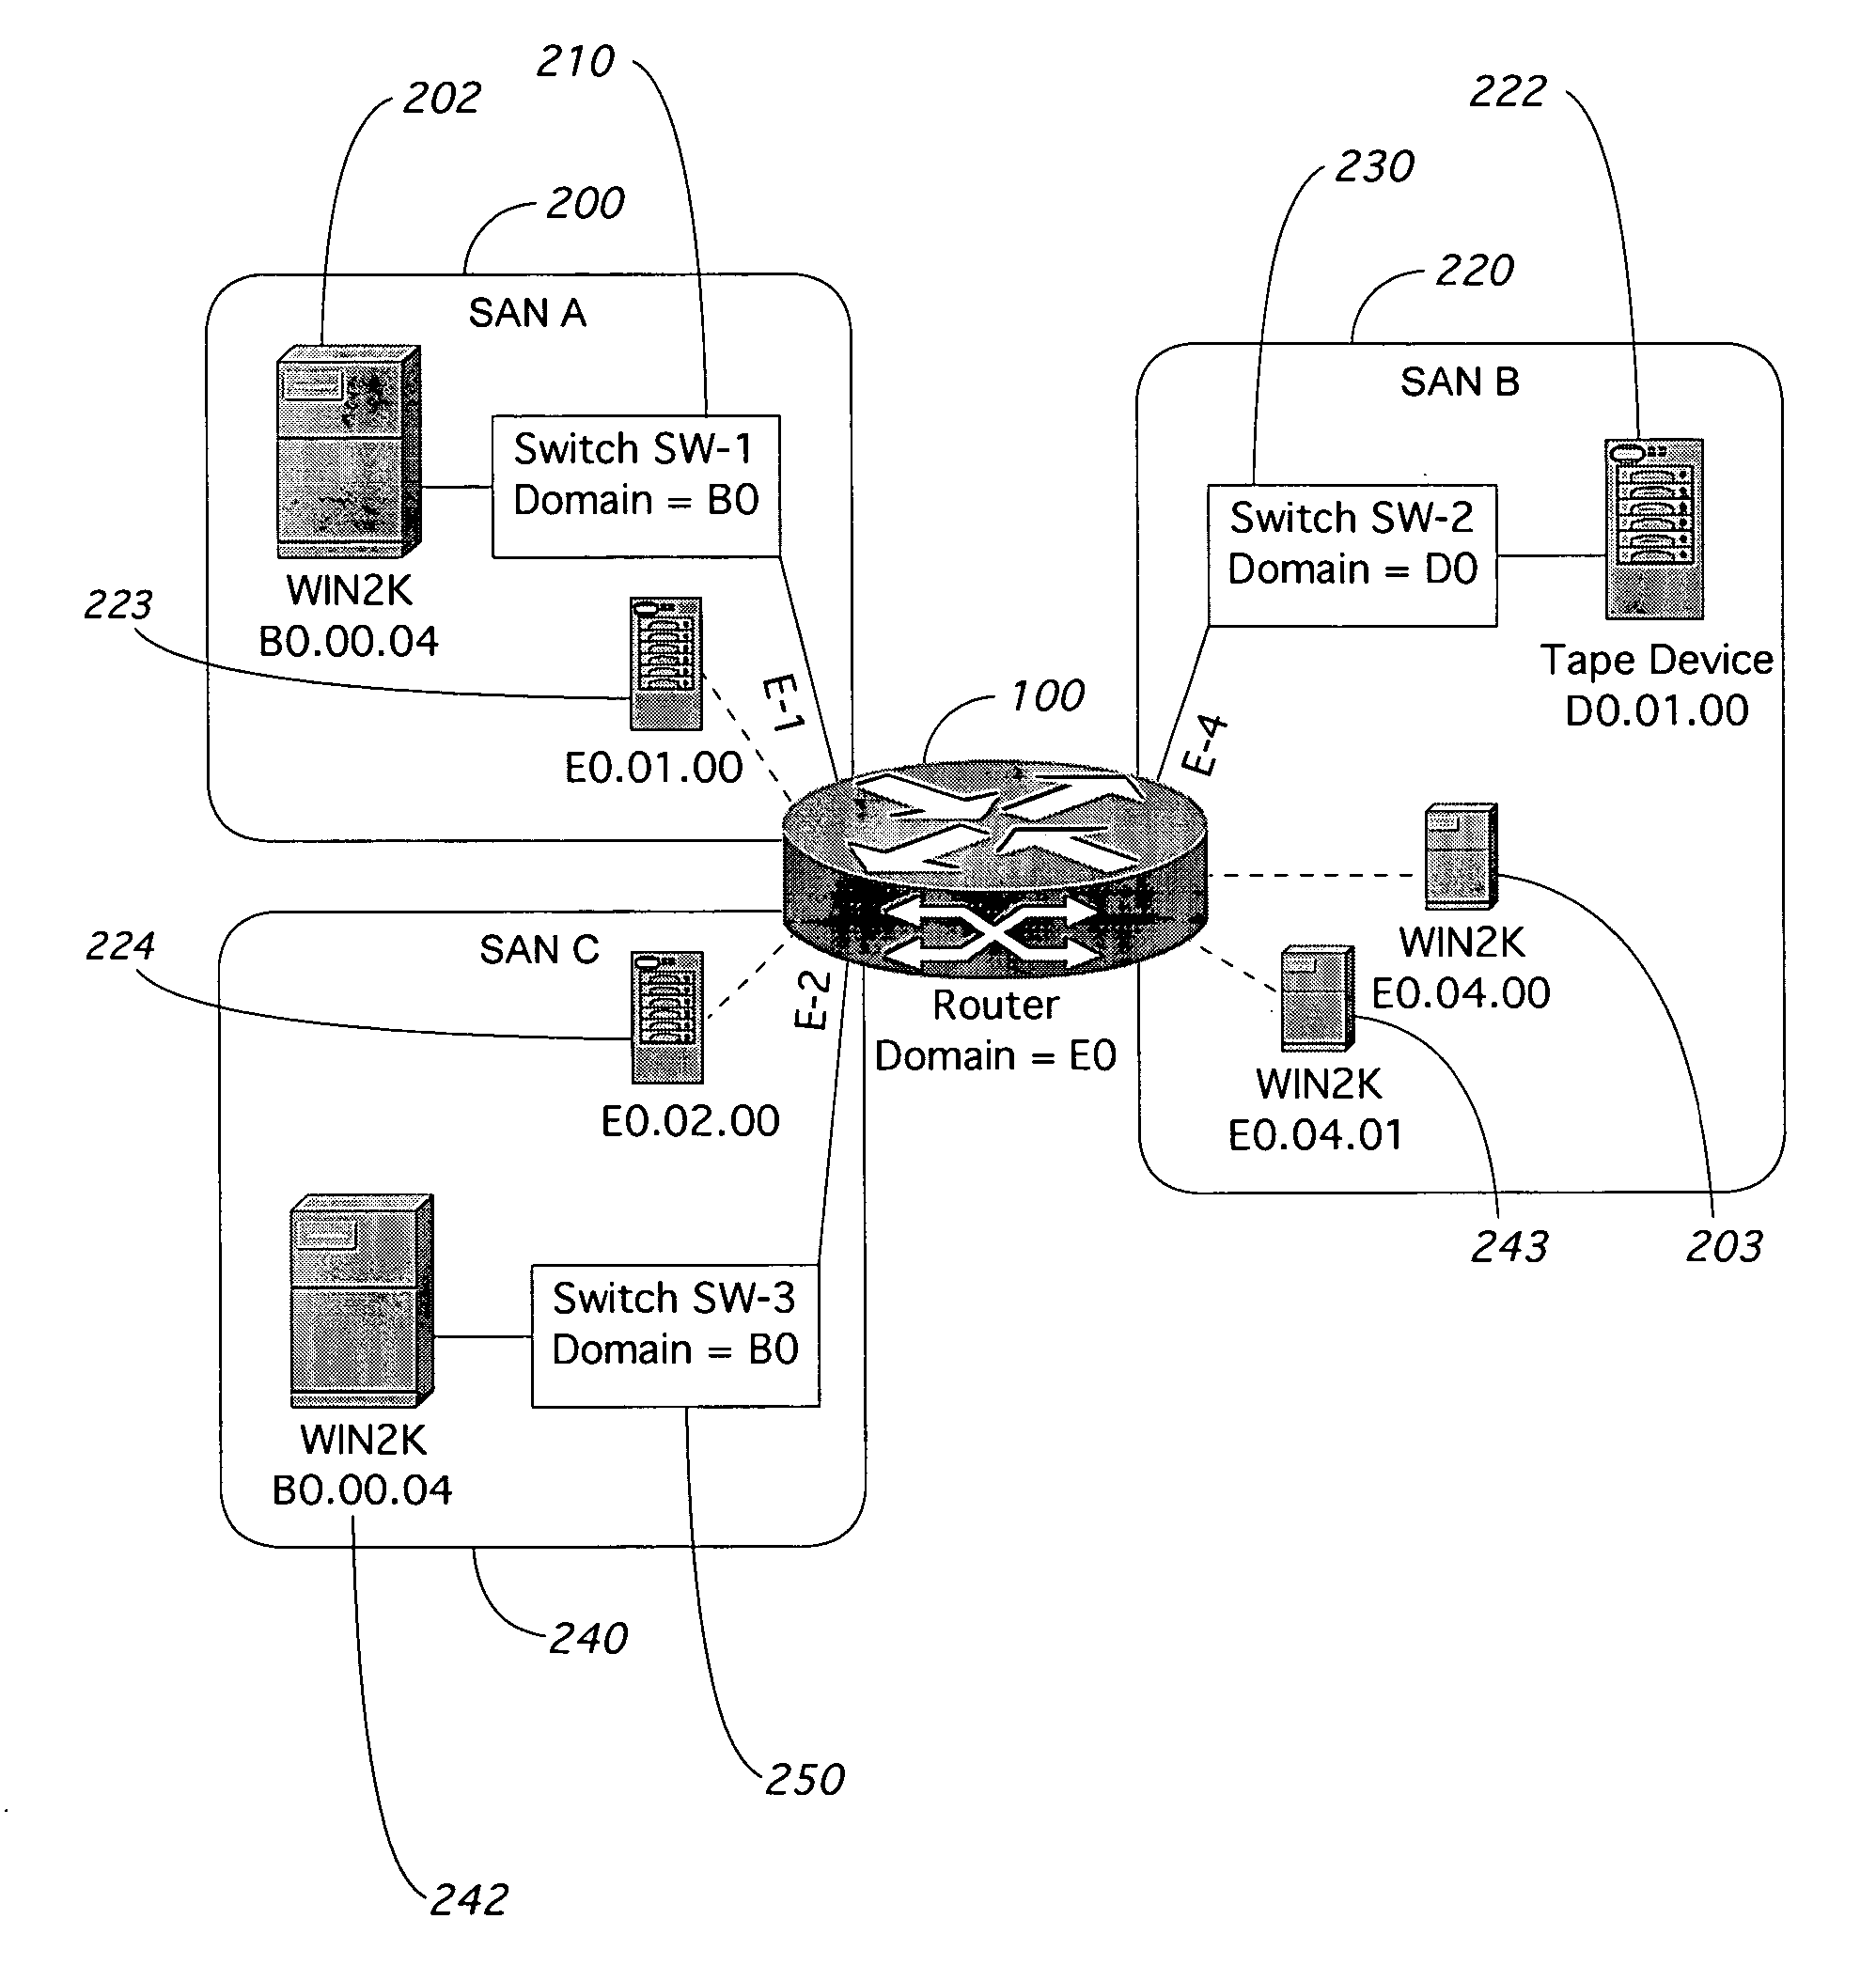 Inter-fabric routing